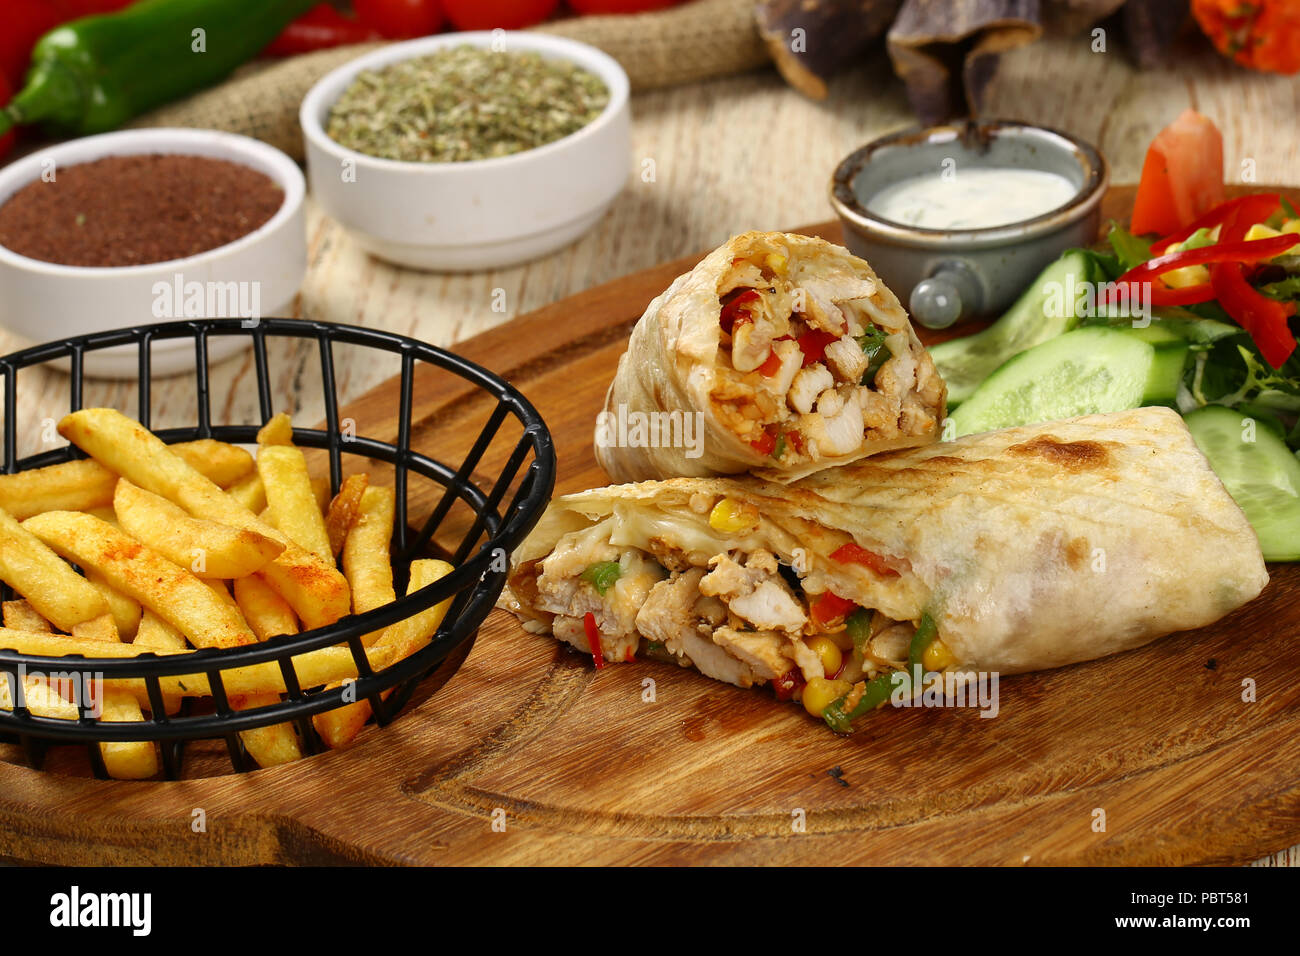 Fried chicken stuffed tortilla wrap sandwich with vegetables and french fries Stock Photo